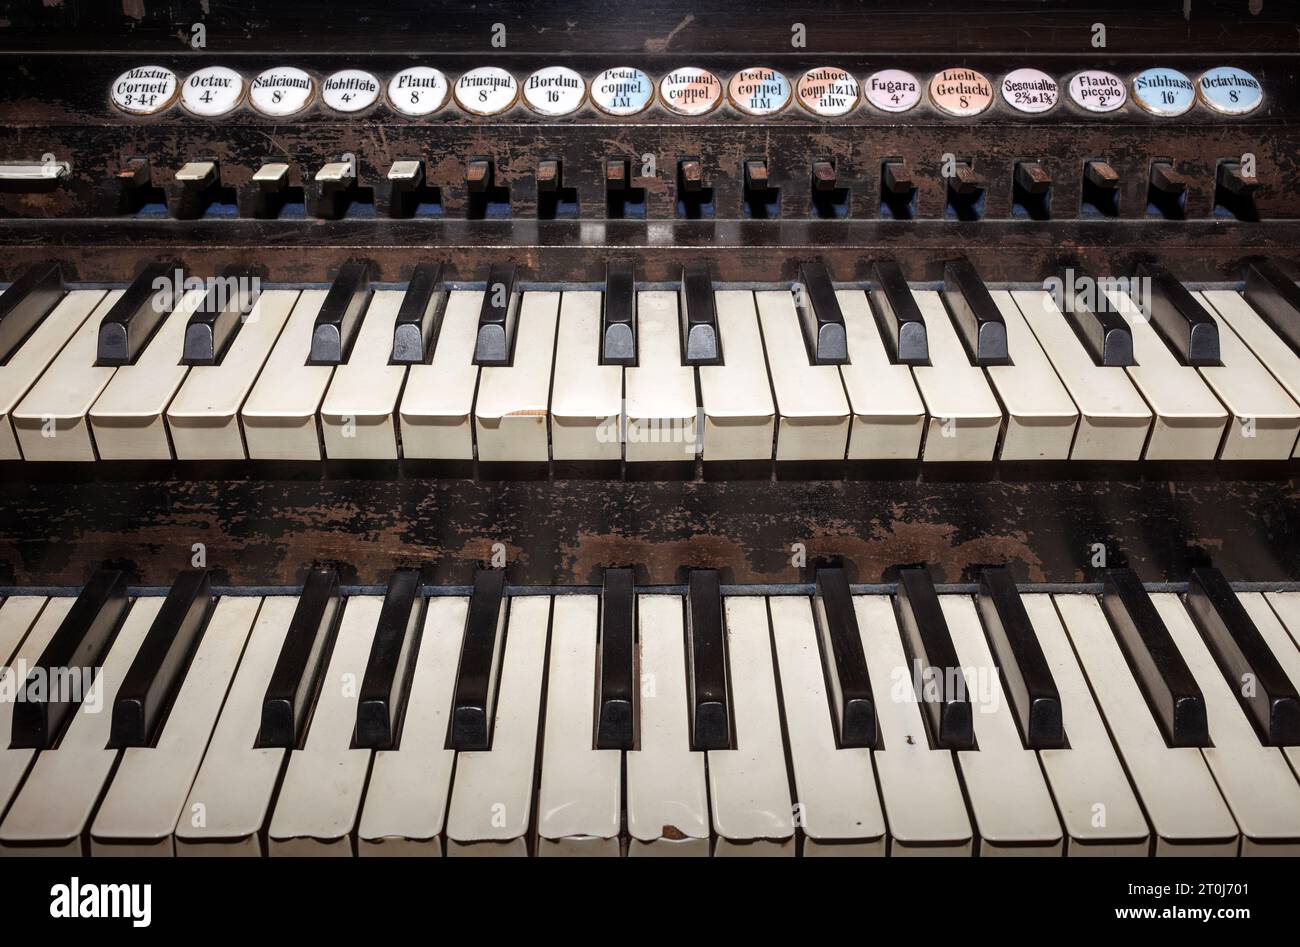 Keyboard and combination pistons of a organ, Organ Museum Borgentreich, Höxter district, North Rhine-Westphalia, Germany, Europe Stock Photo